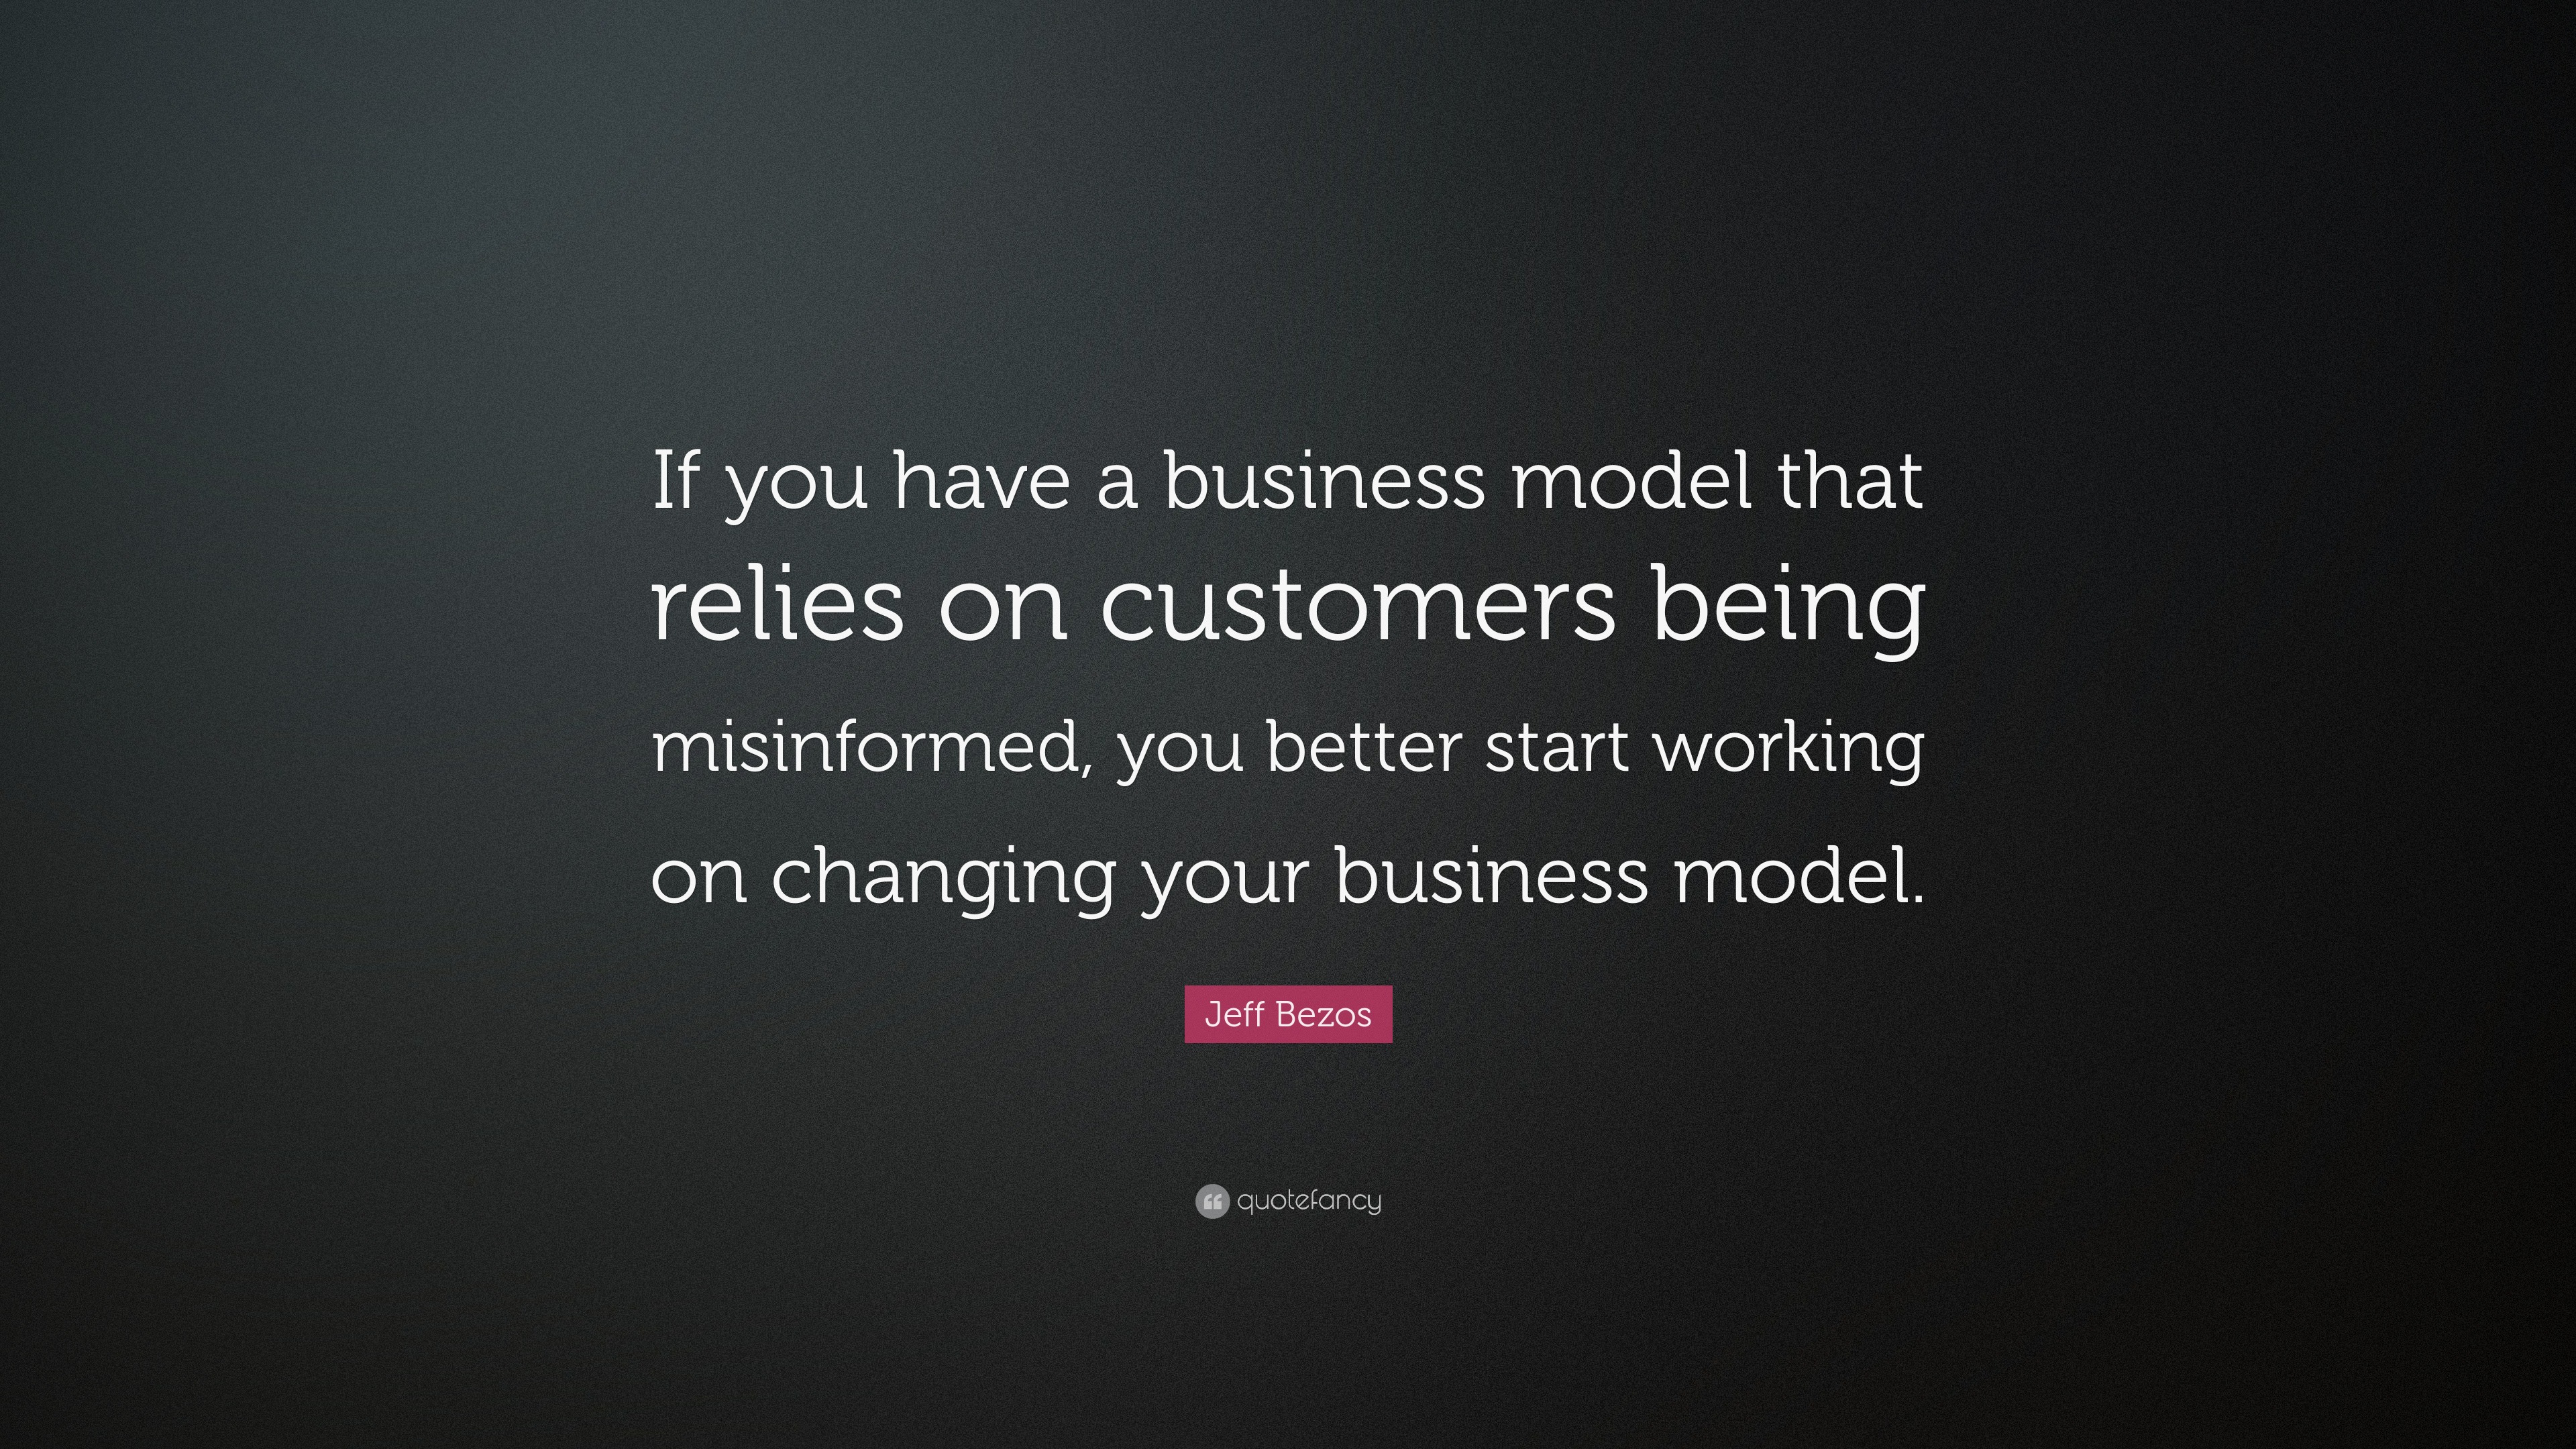 Jeff Bezos Quote: “If you have a business model that relies on ...